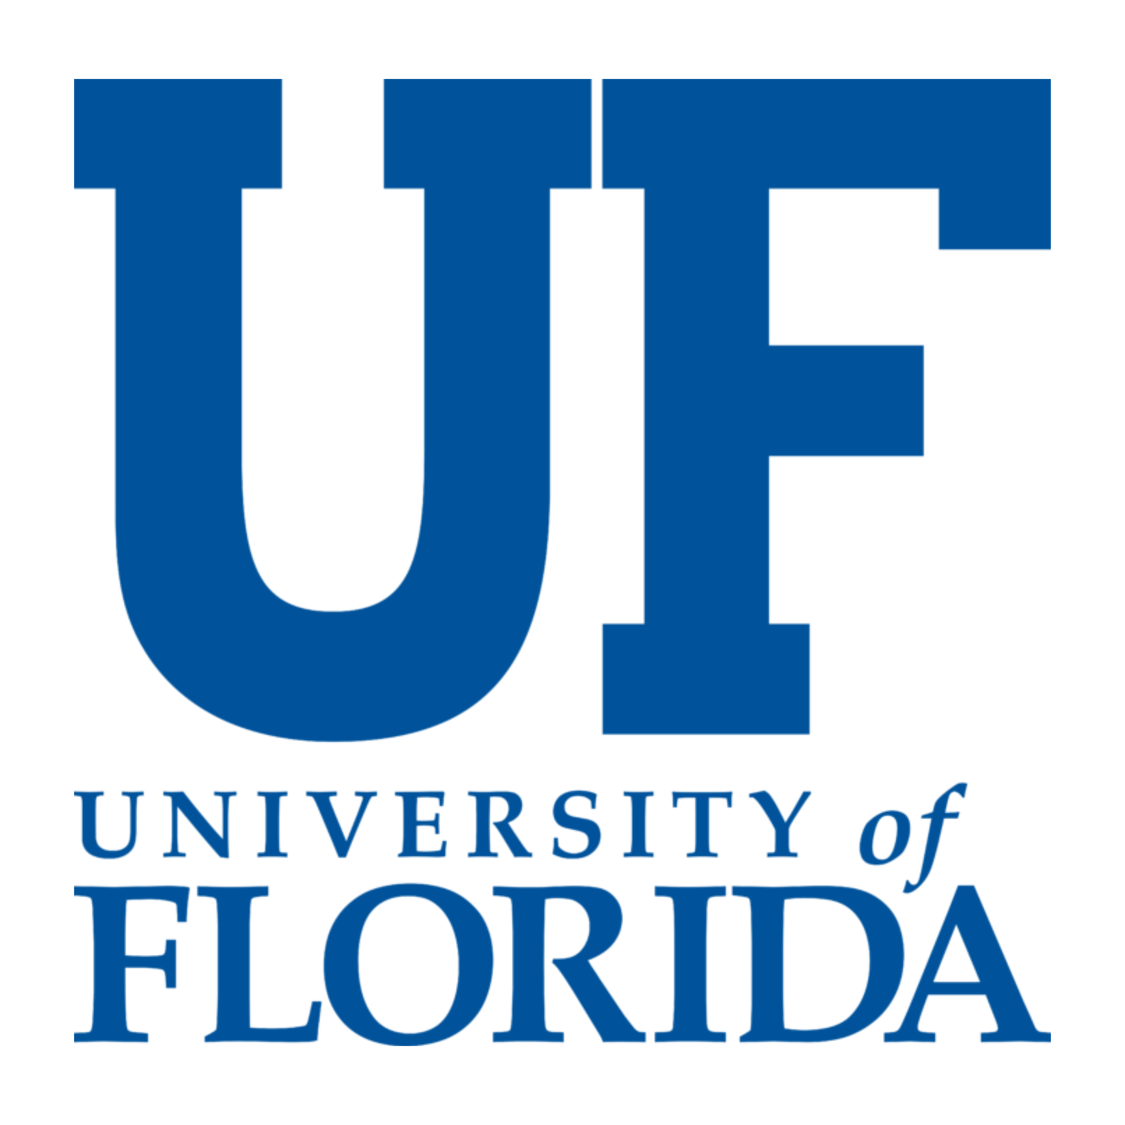 University of Florida logo, In large blue letters is a U and a F next to each other. Below in blue text reads, “University of Florida”